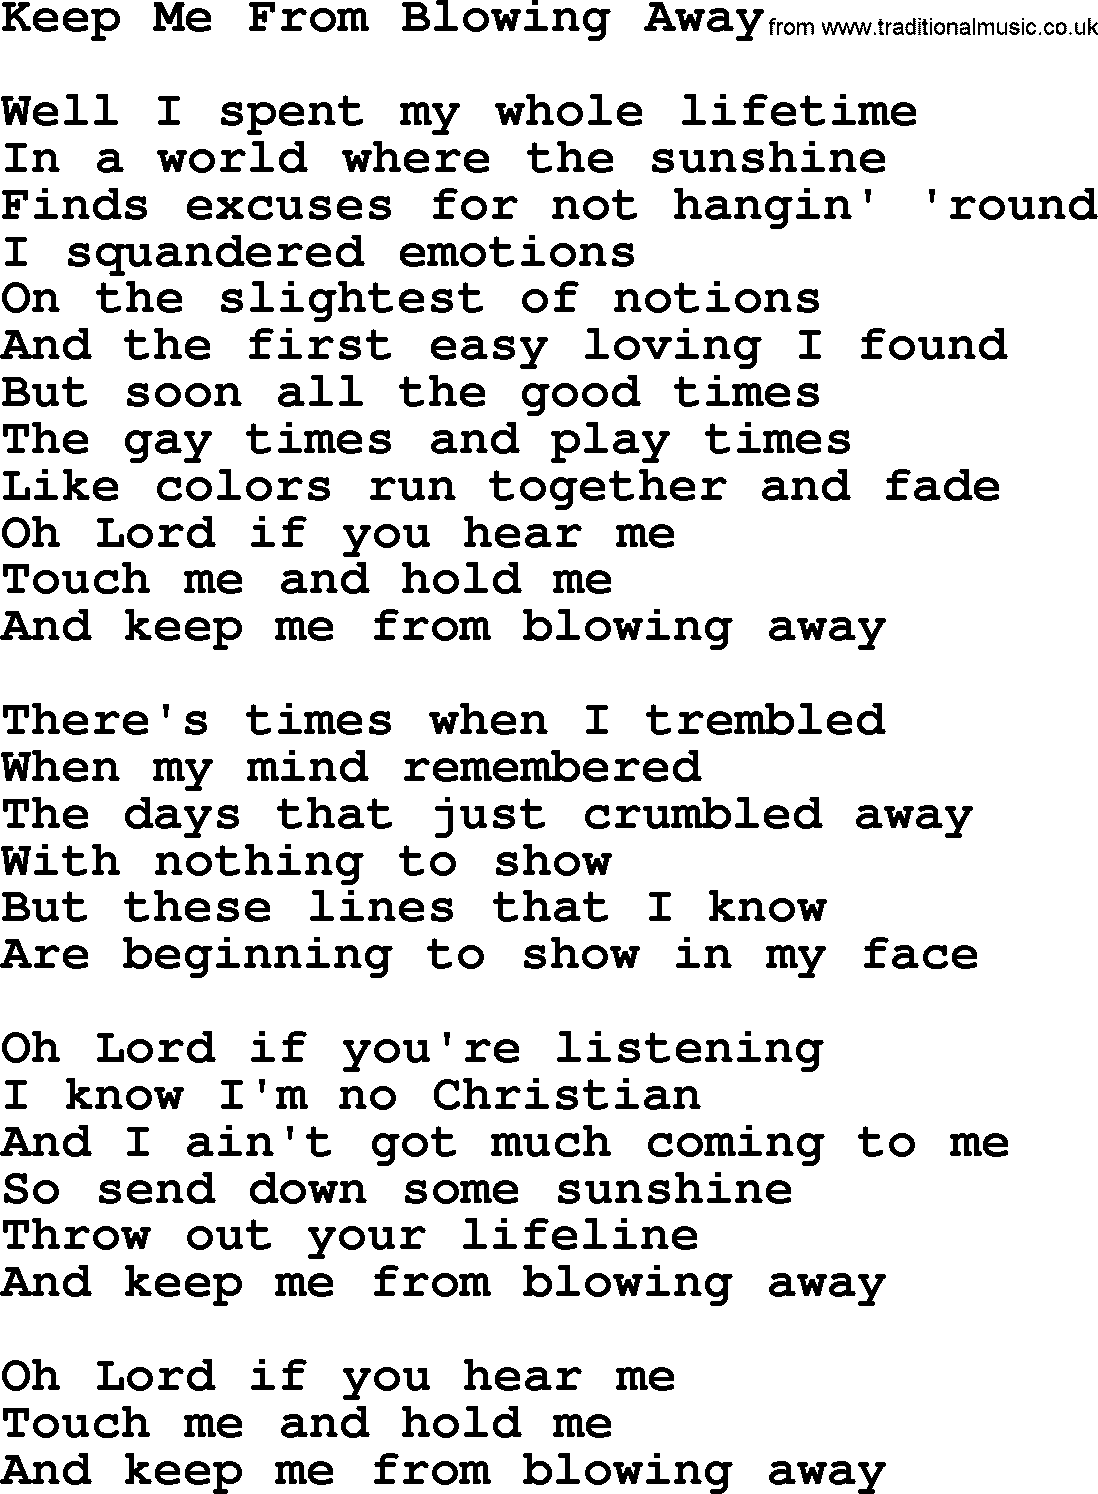 Willie Nelson song: Keep Me From Blowing Away lyrics